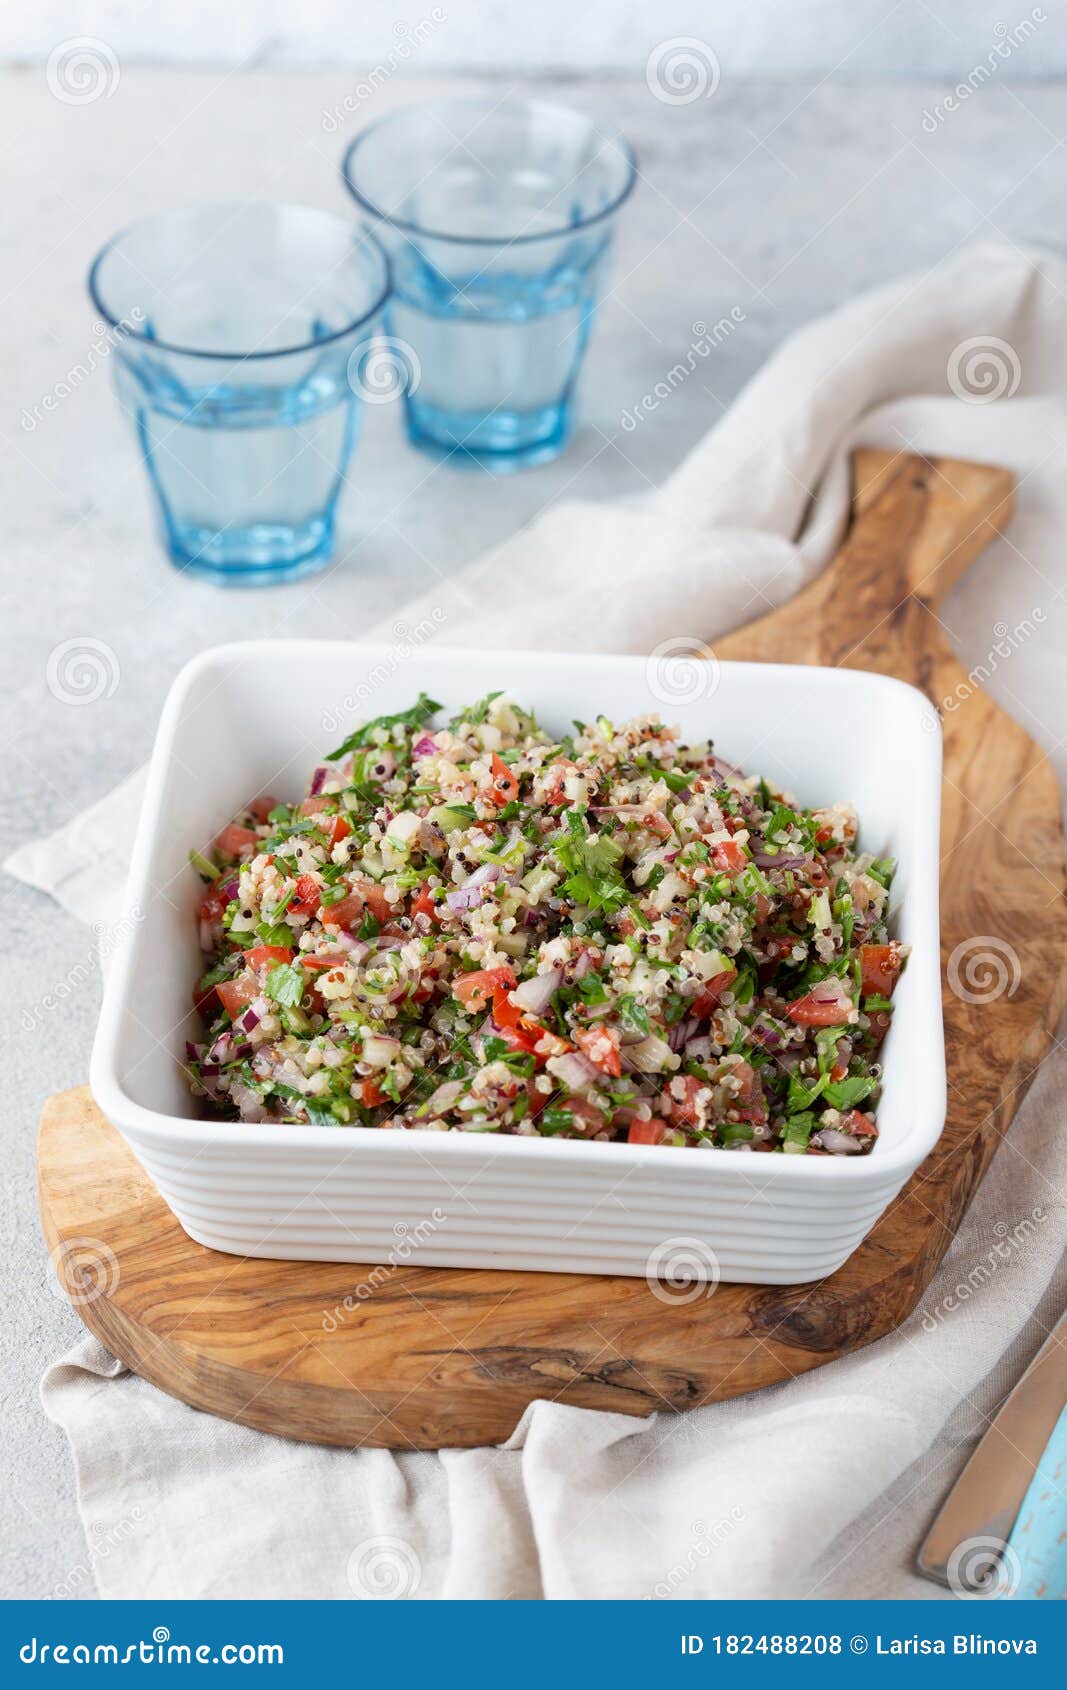 quinoa quinua salad with tomatoes and herbs in white bowl